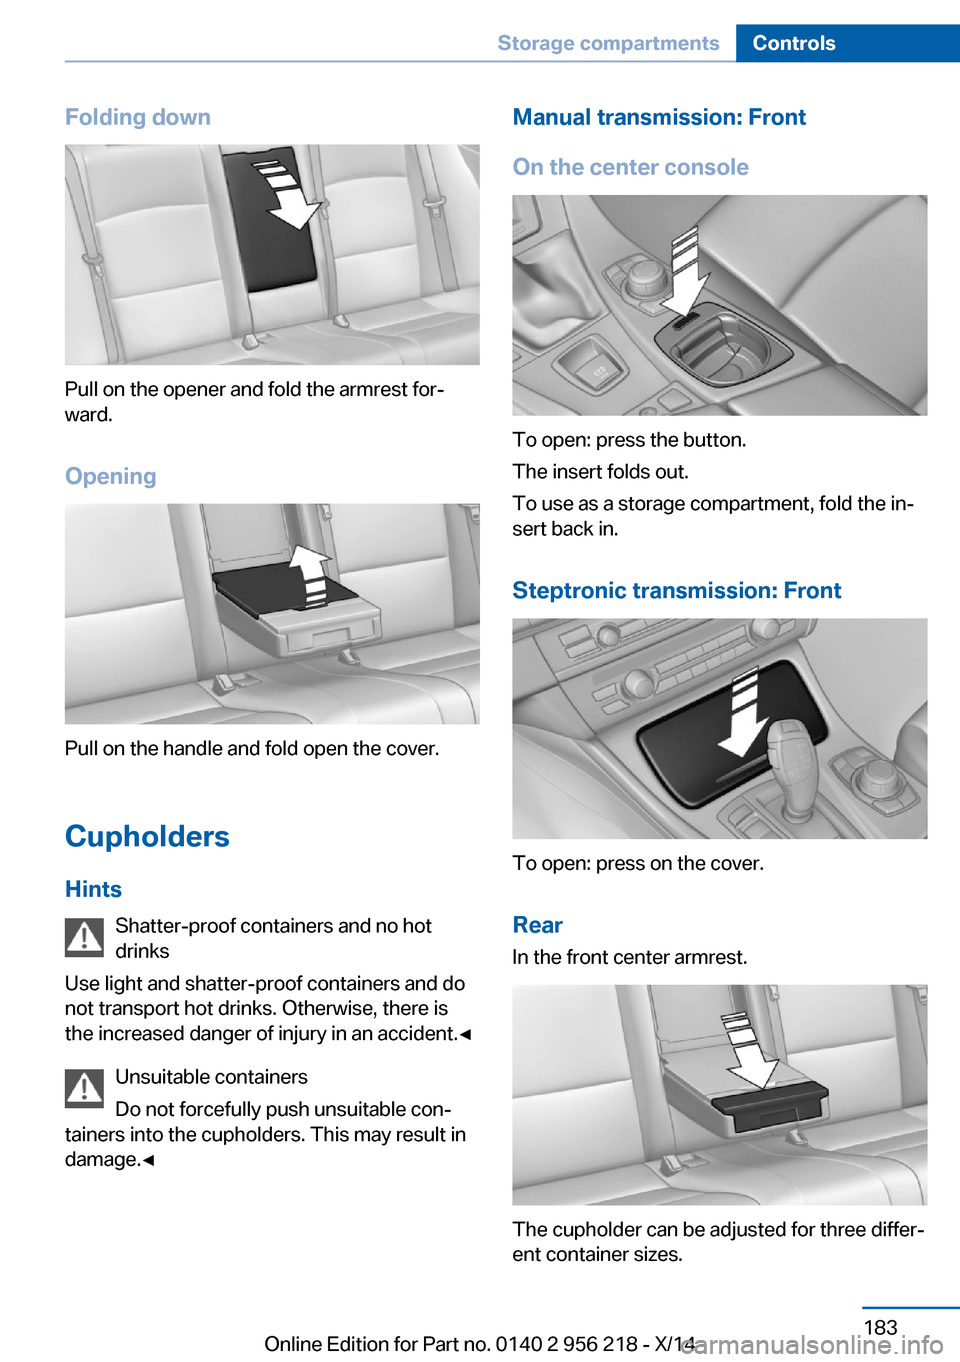 BMW 5 SERIES 2014 F10 Owners Manual Folding down
Pull on the opener and fold the armrest for‐
ward.
Opening
Pull on the handle and fold open the cover.
Cupholders Hints Shatter-proof containers and no hot
drinks
Use light and shatter-